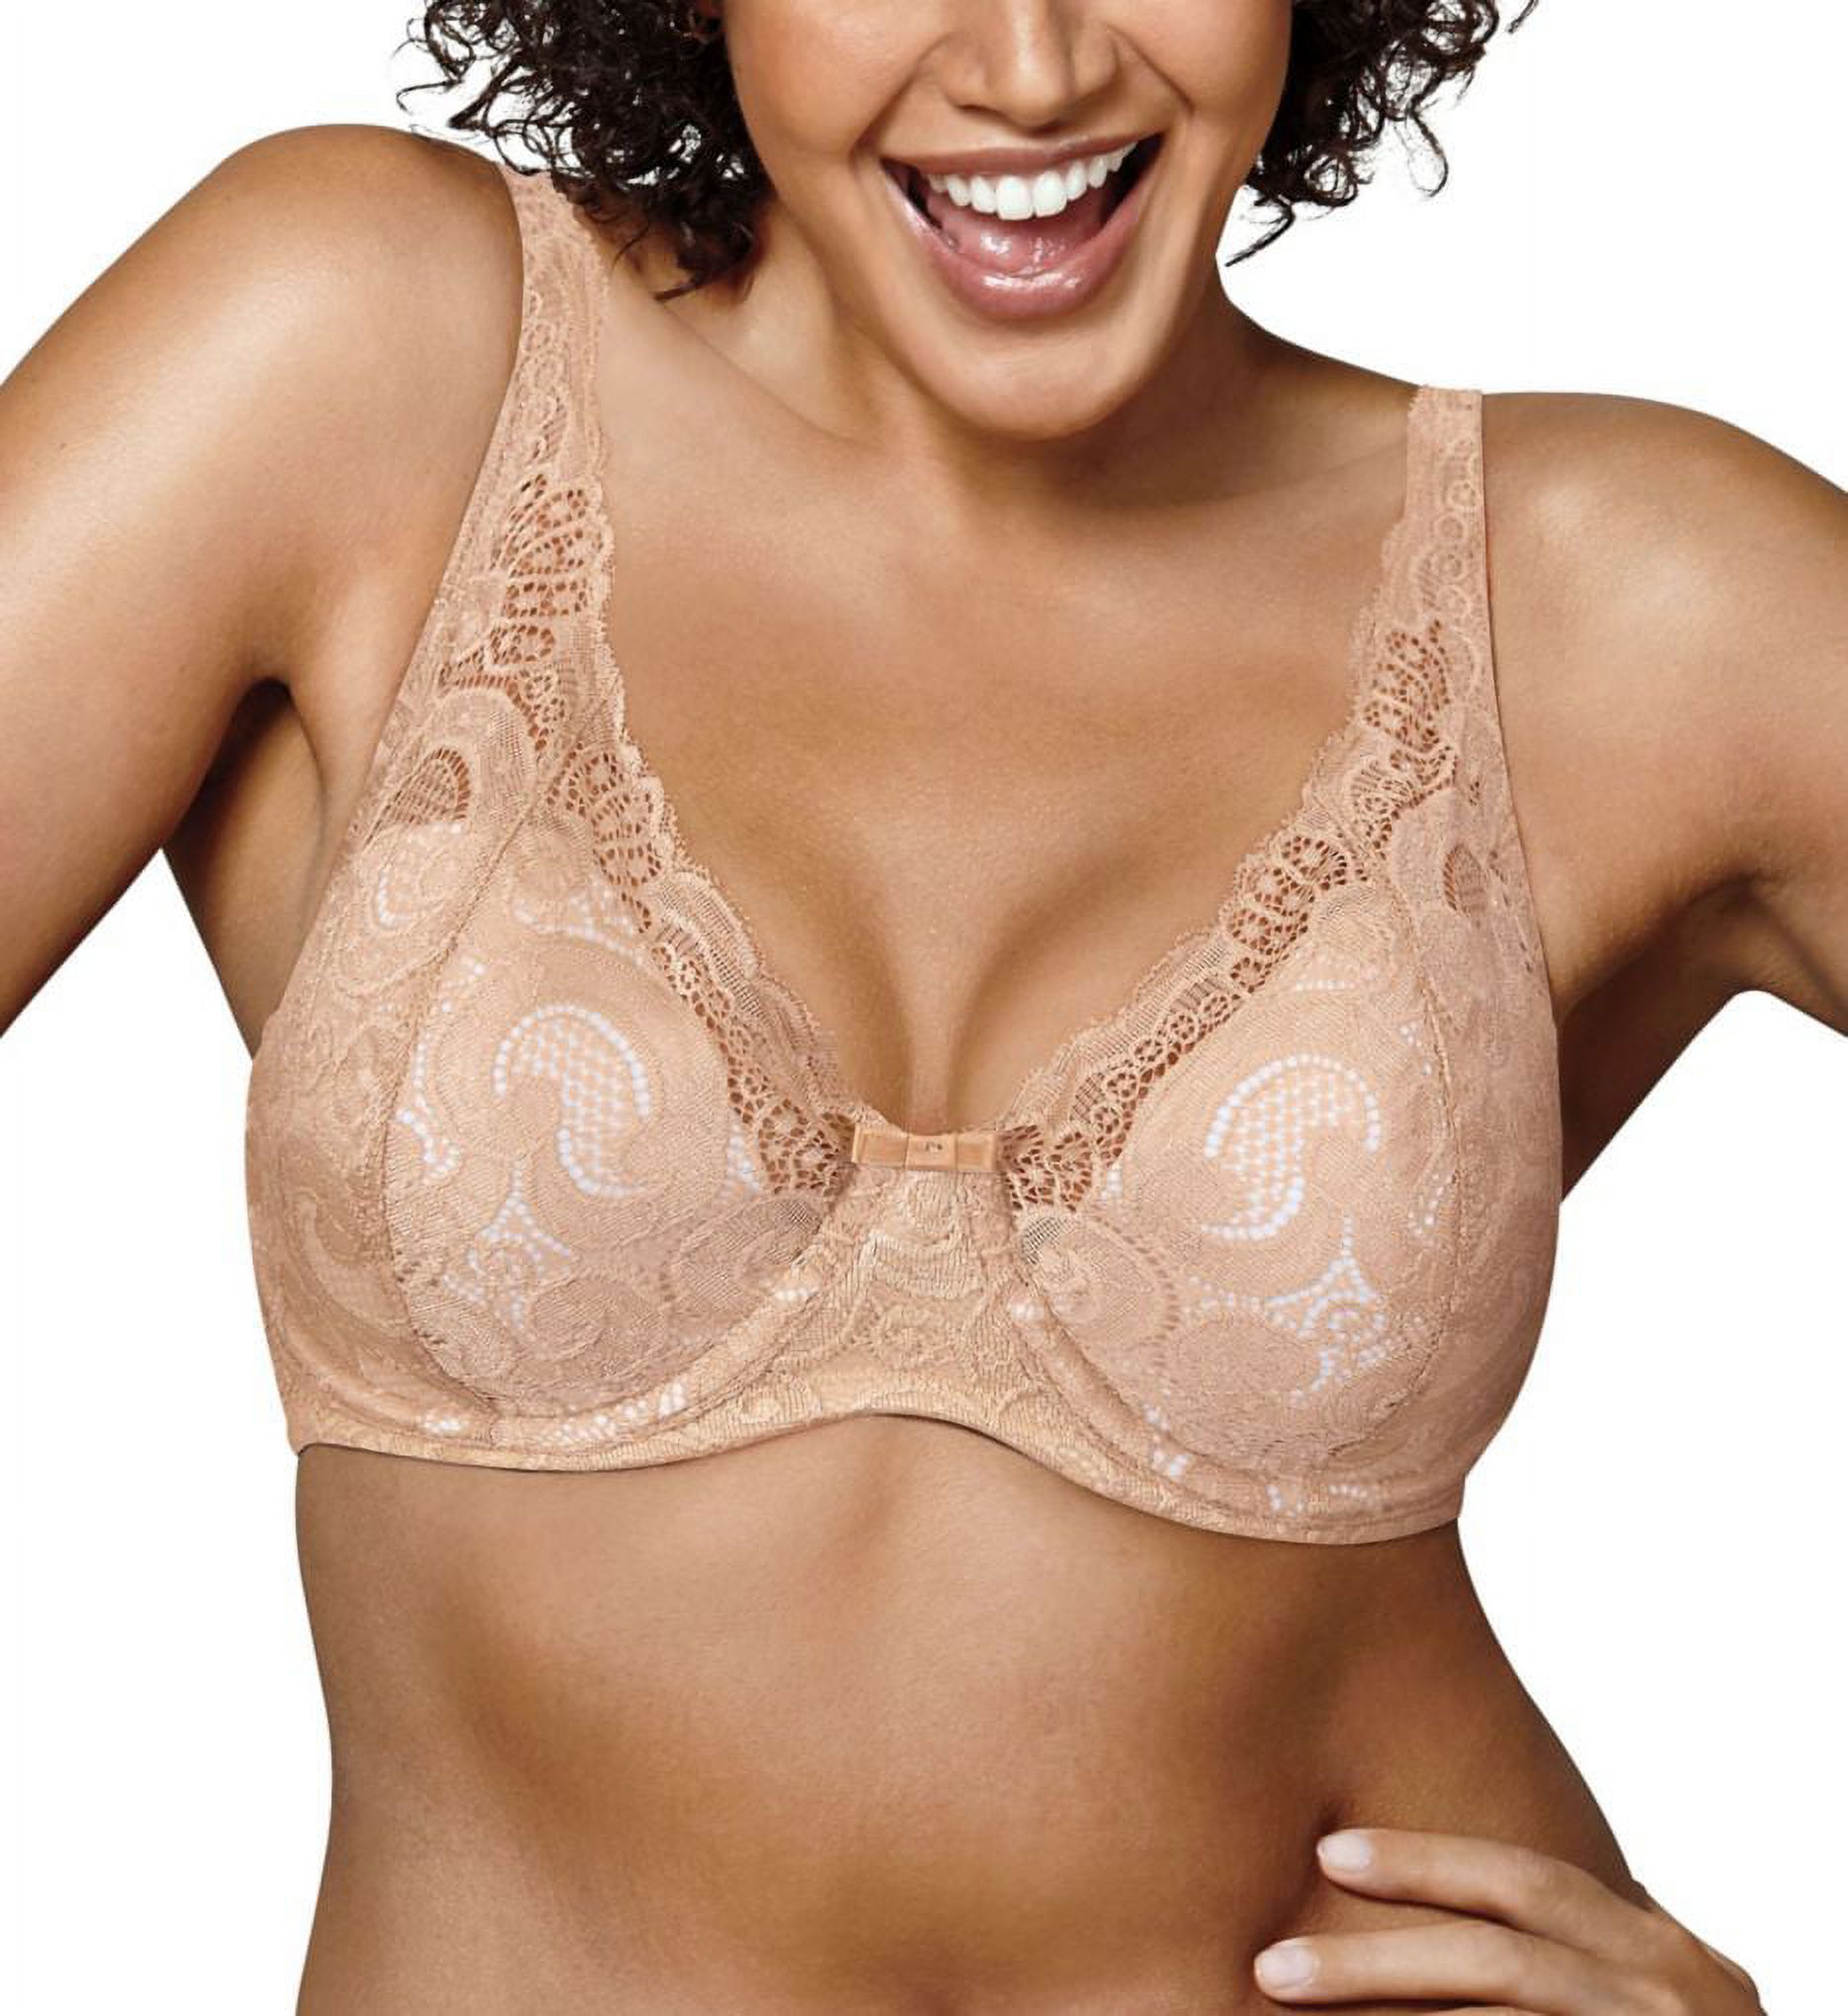 Women's Playtex US4514 Love My Curves Thin Foam with Lace Underwire Bra (Cafe/Ivory Pearl 42DD) - image 1 of 2